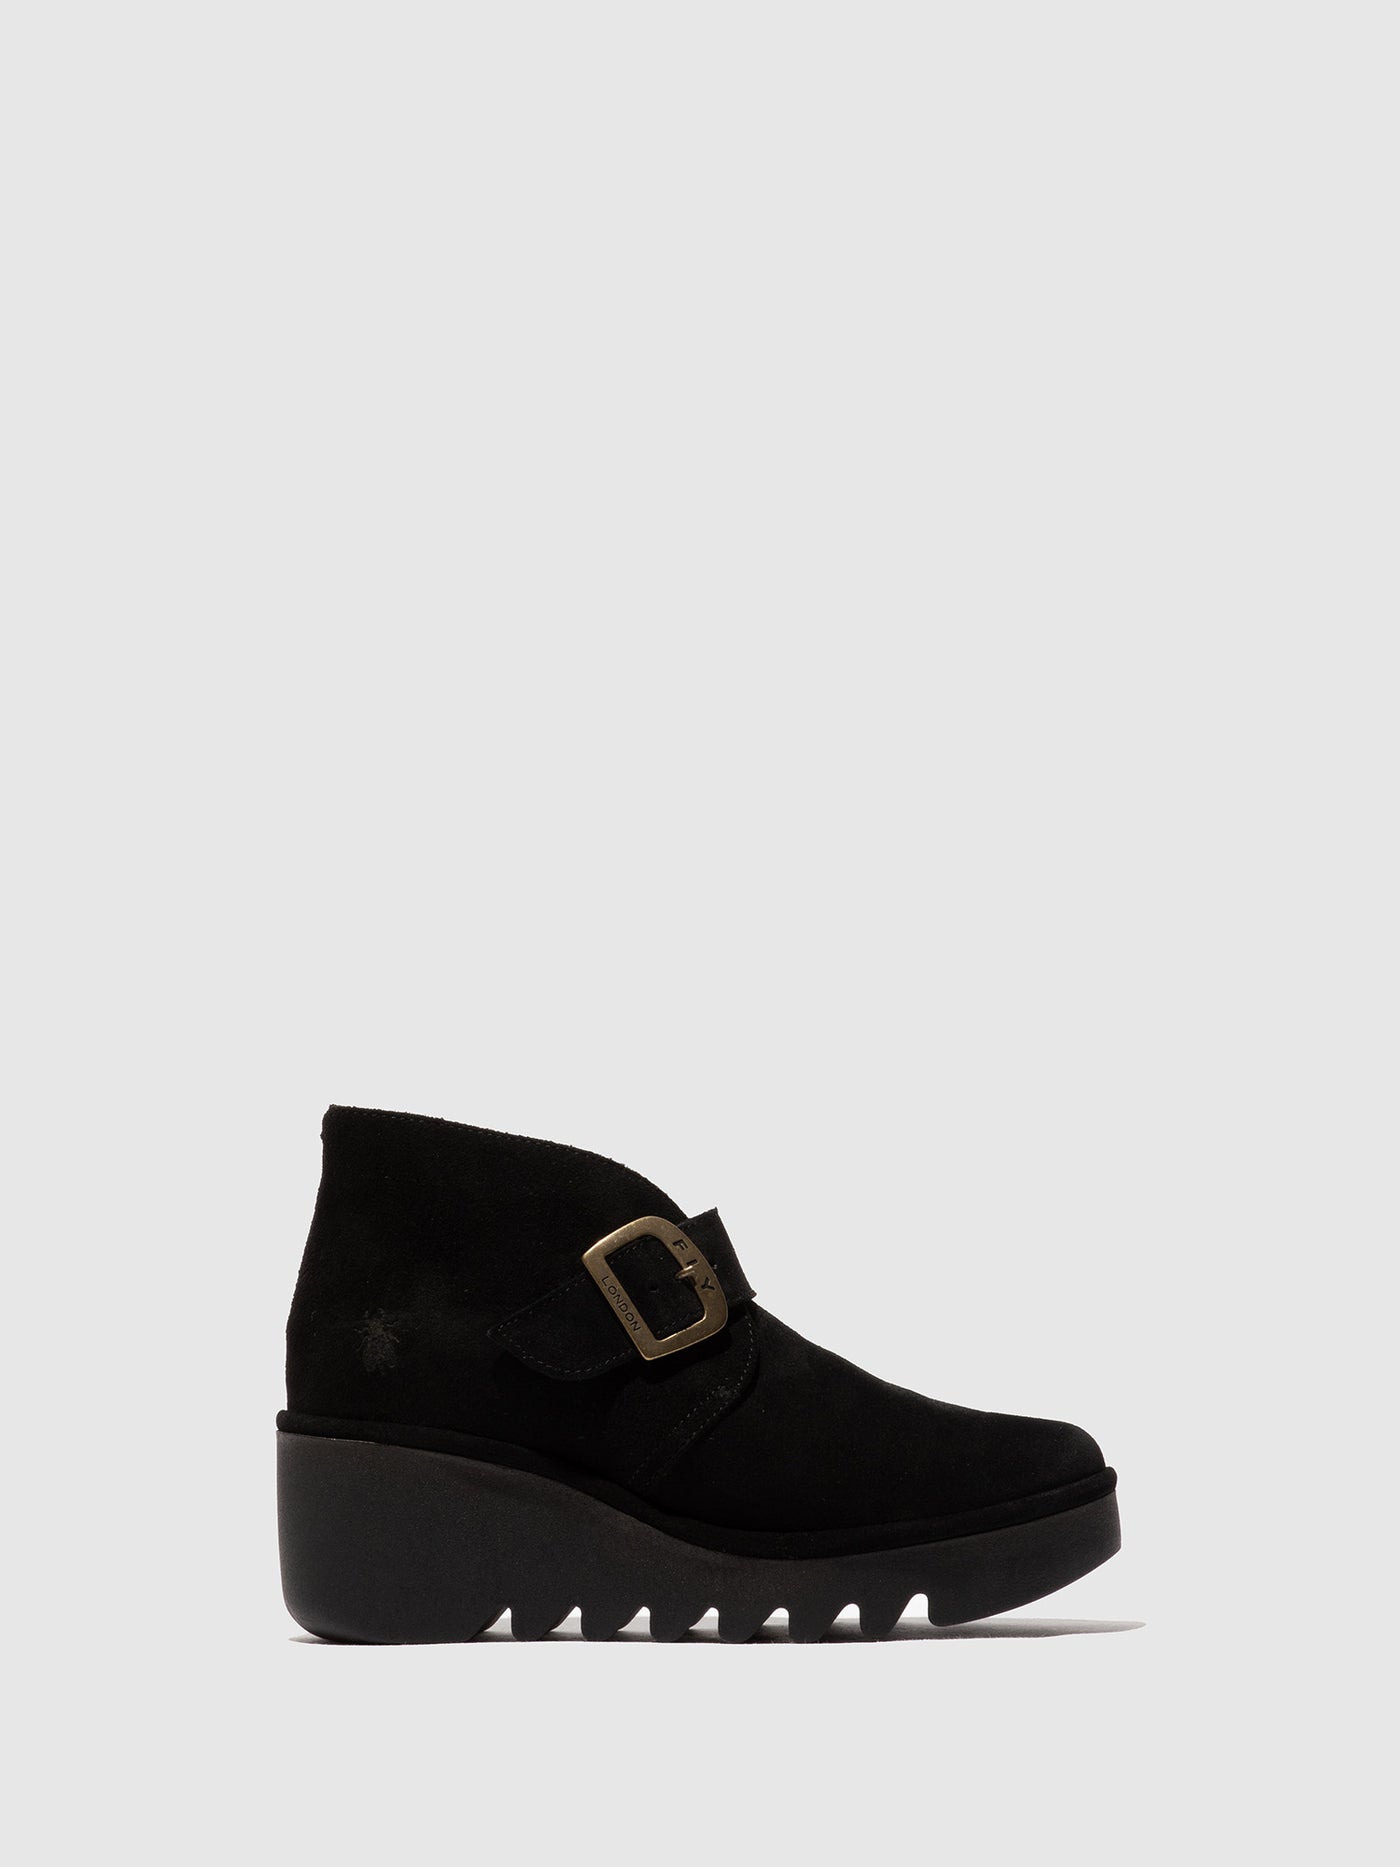 Buckle Ankle Boots BIRT397FLY OIL SUEDE BLACK